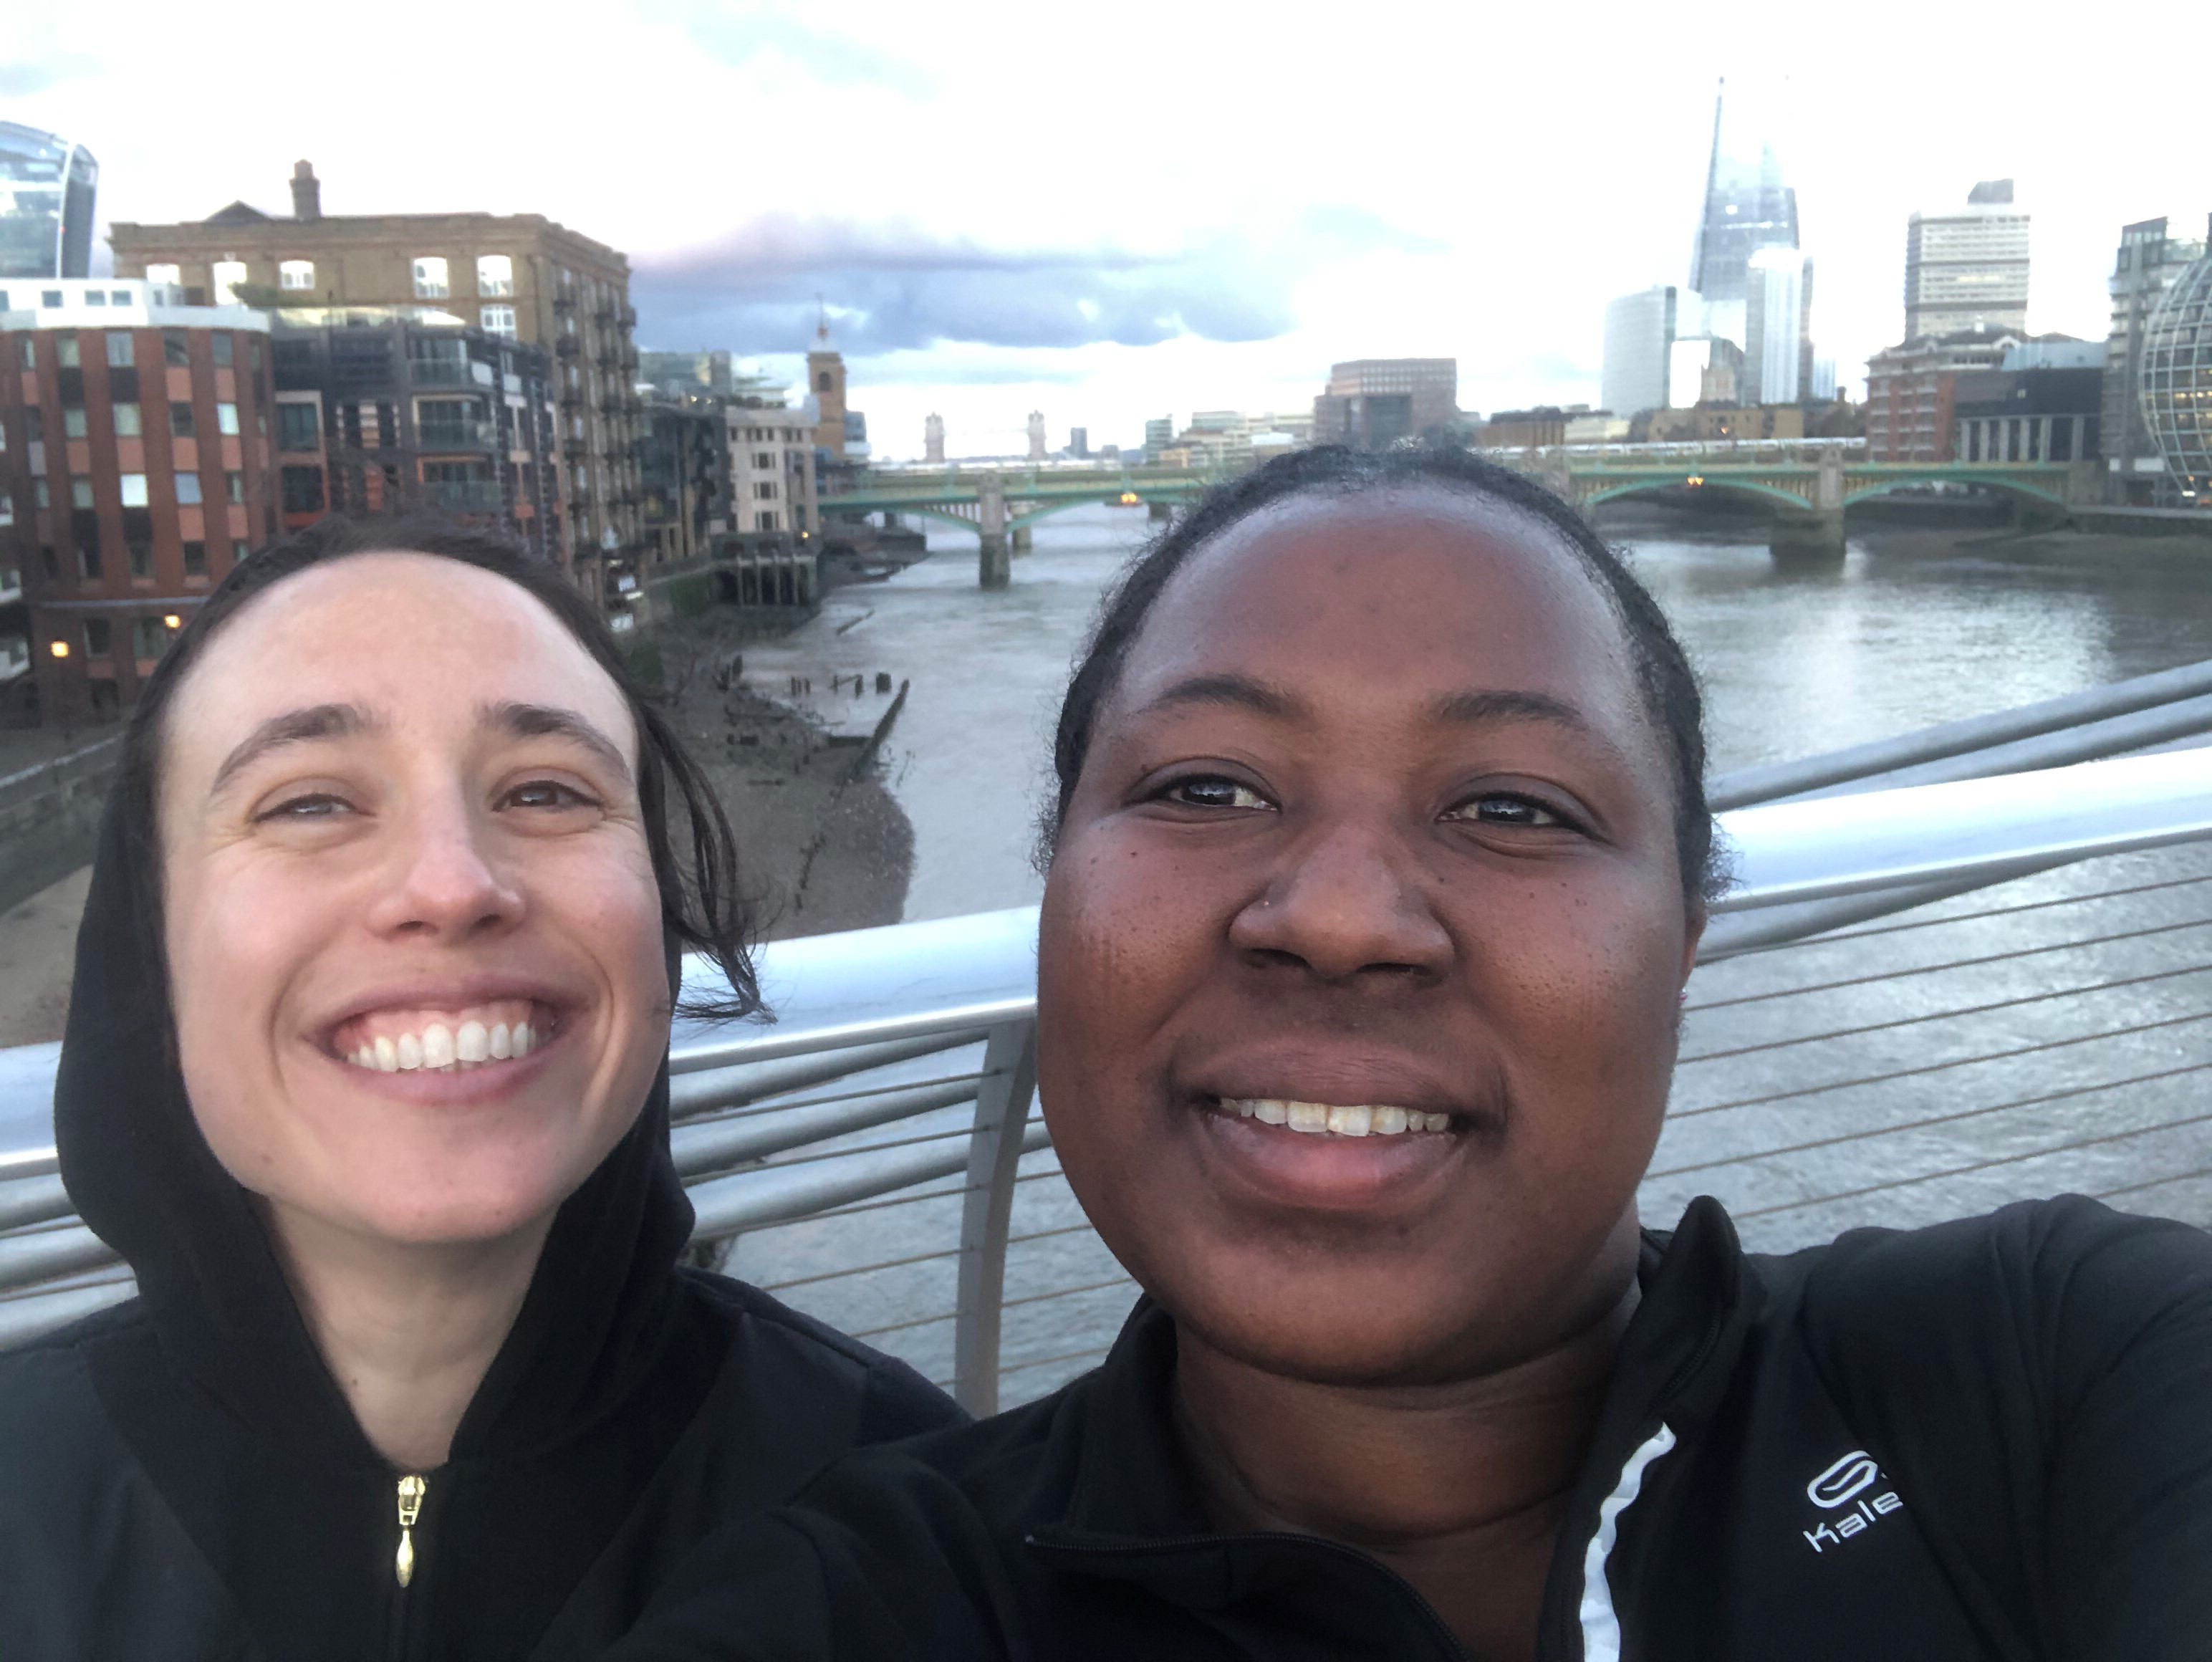 Augusta and her housemate out for a run in London.